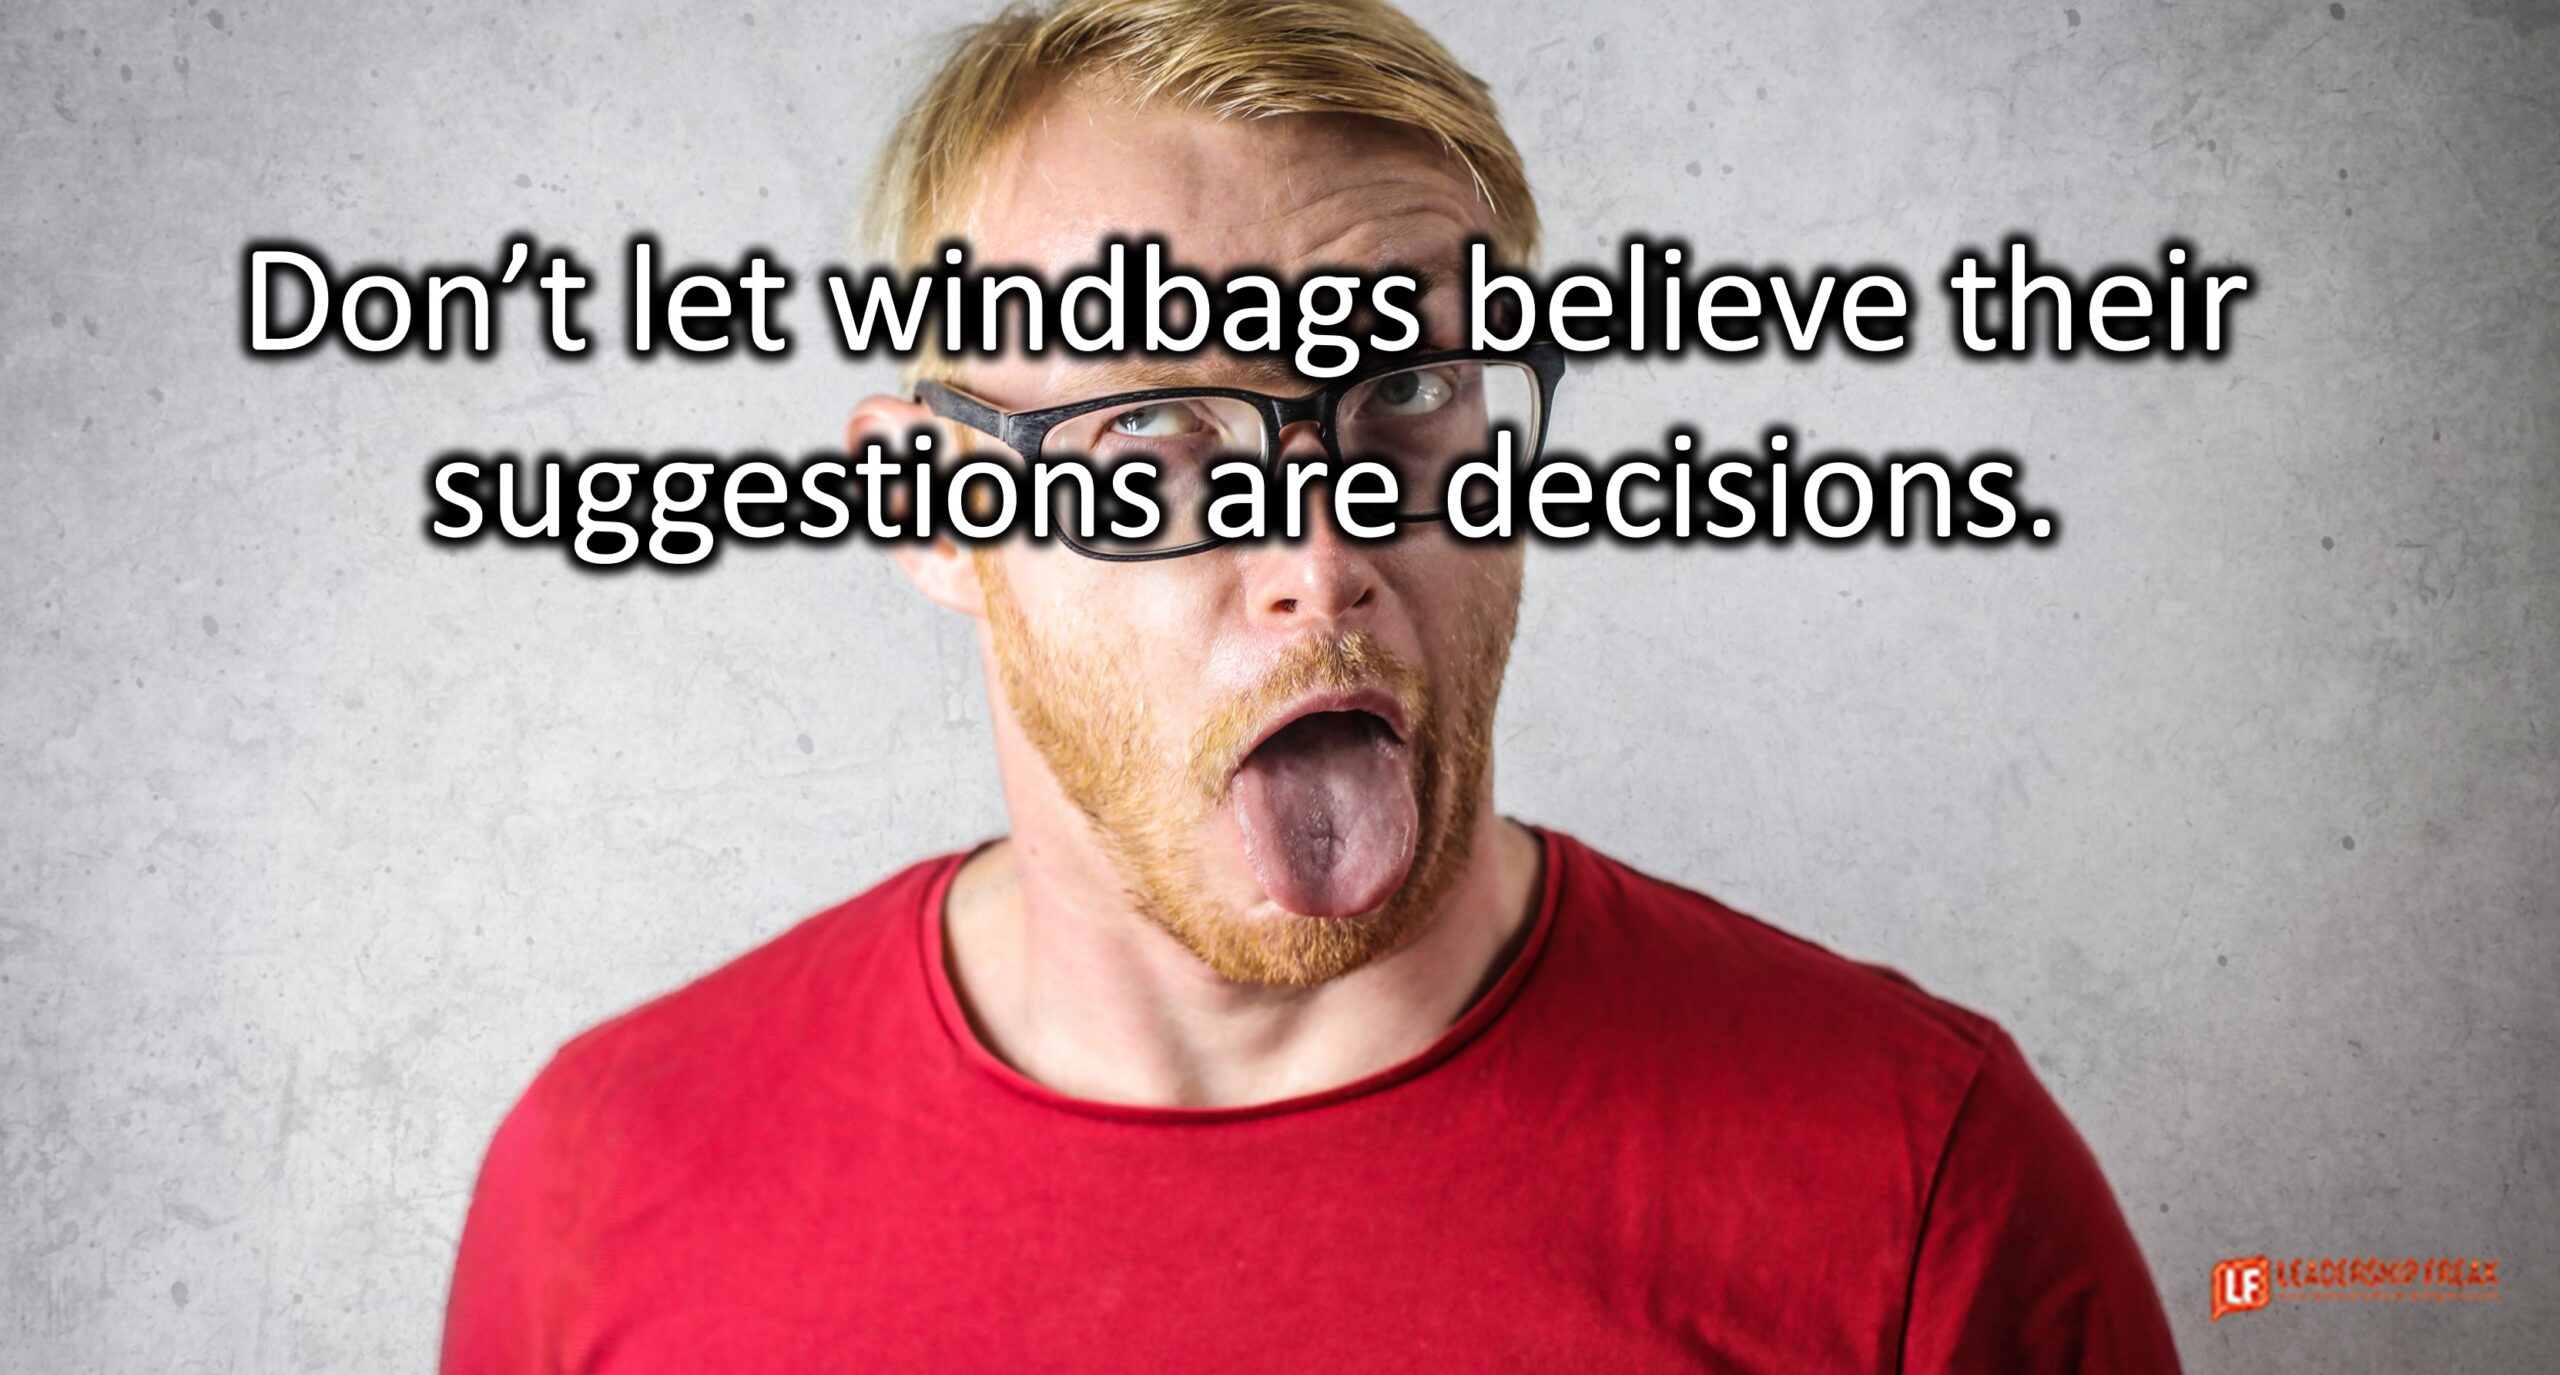 Don't let windbags believe their suggestions are decisions